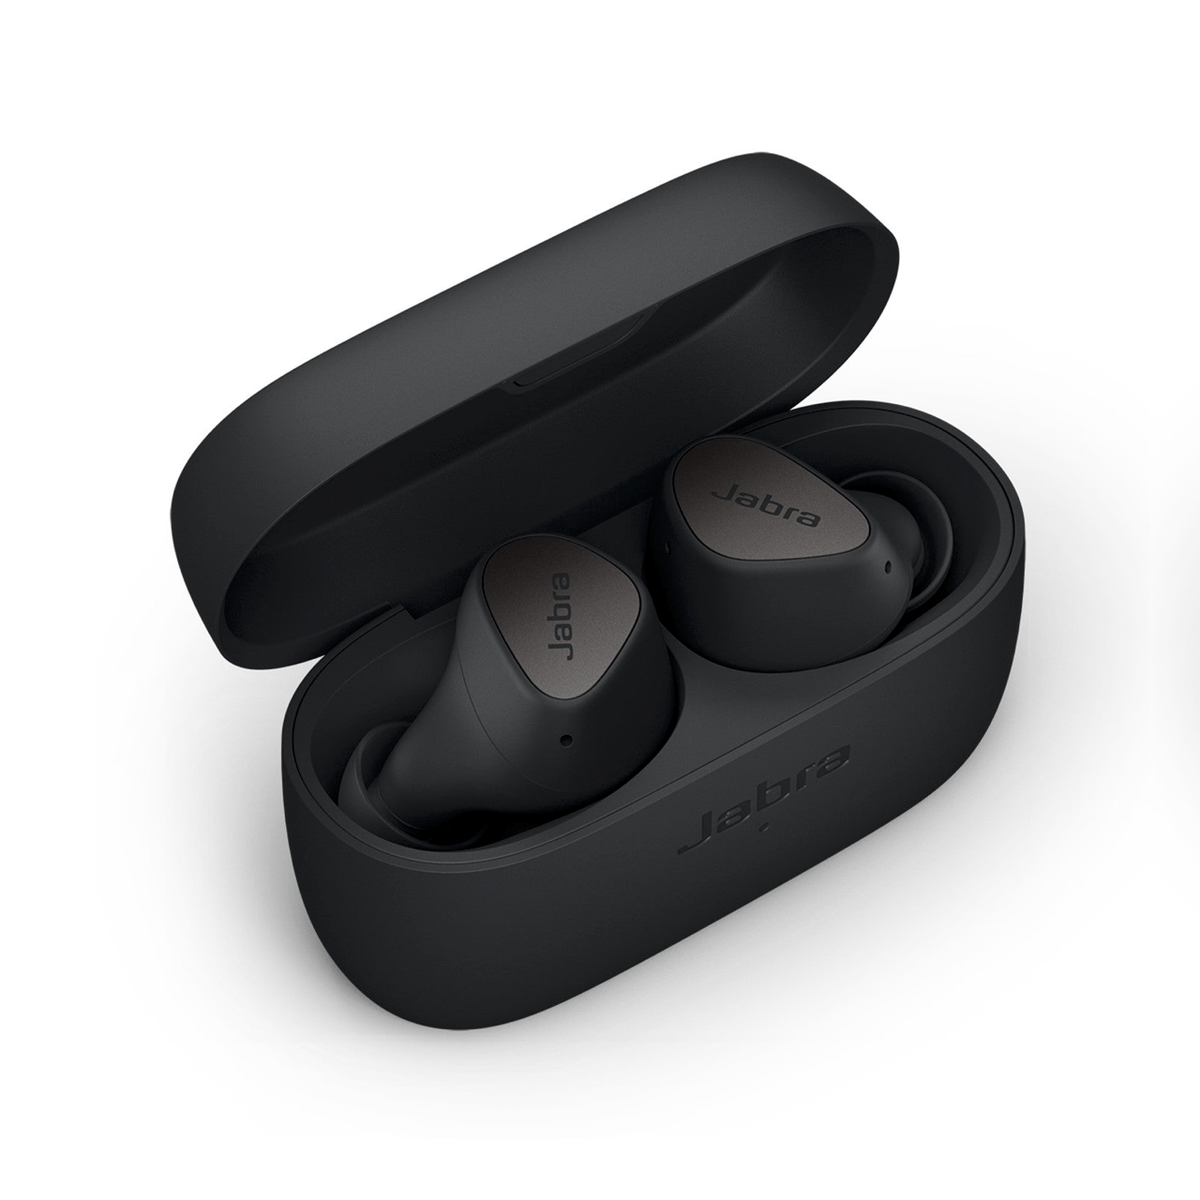 Jabra Elite 85t True Wireless Bluetooth Earbuds, Titanium Black – Advanced  Noise-Cancelling Earbuds with Charging Case for Calls & Music – Wireless